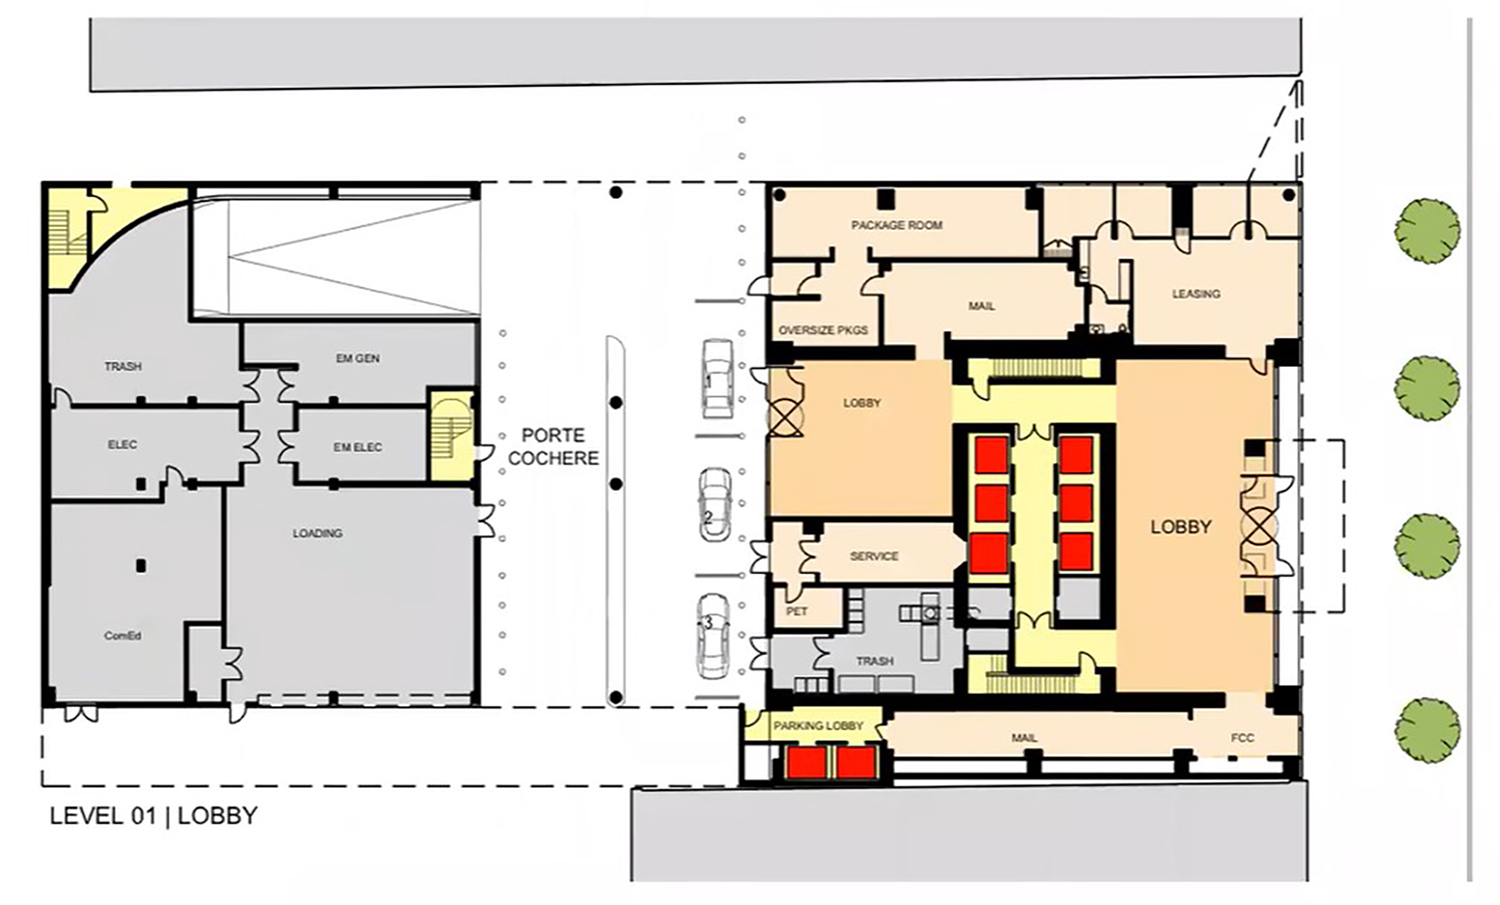 Ground Floor Plan for 1000M. Drawing by JAHN